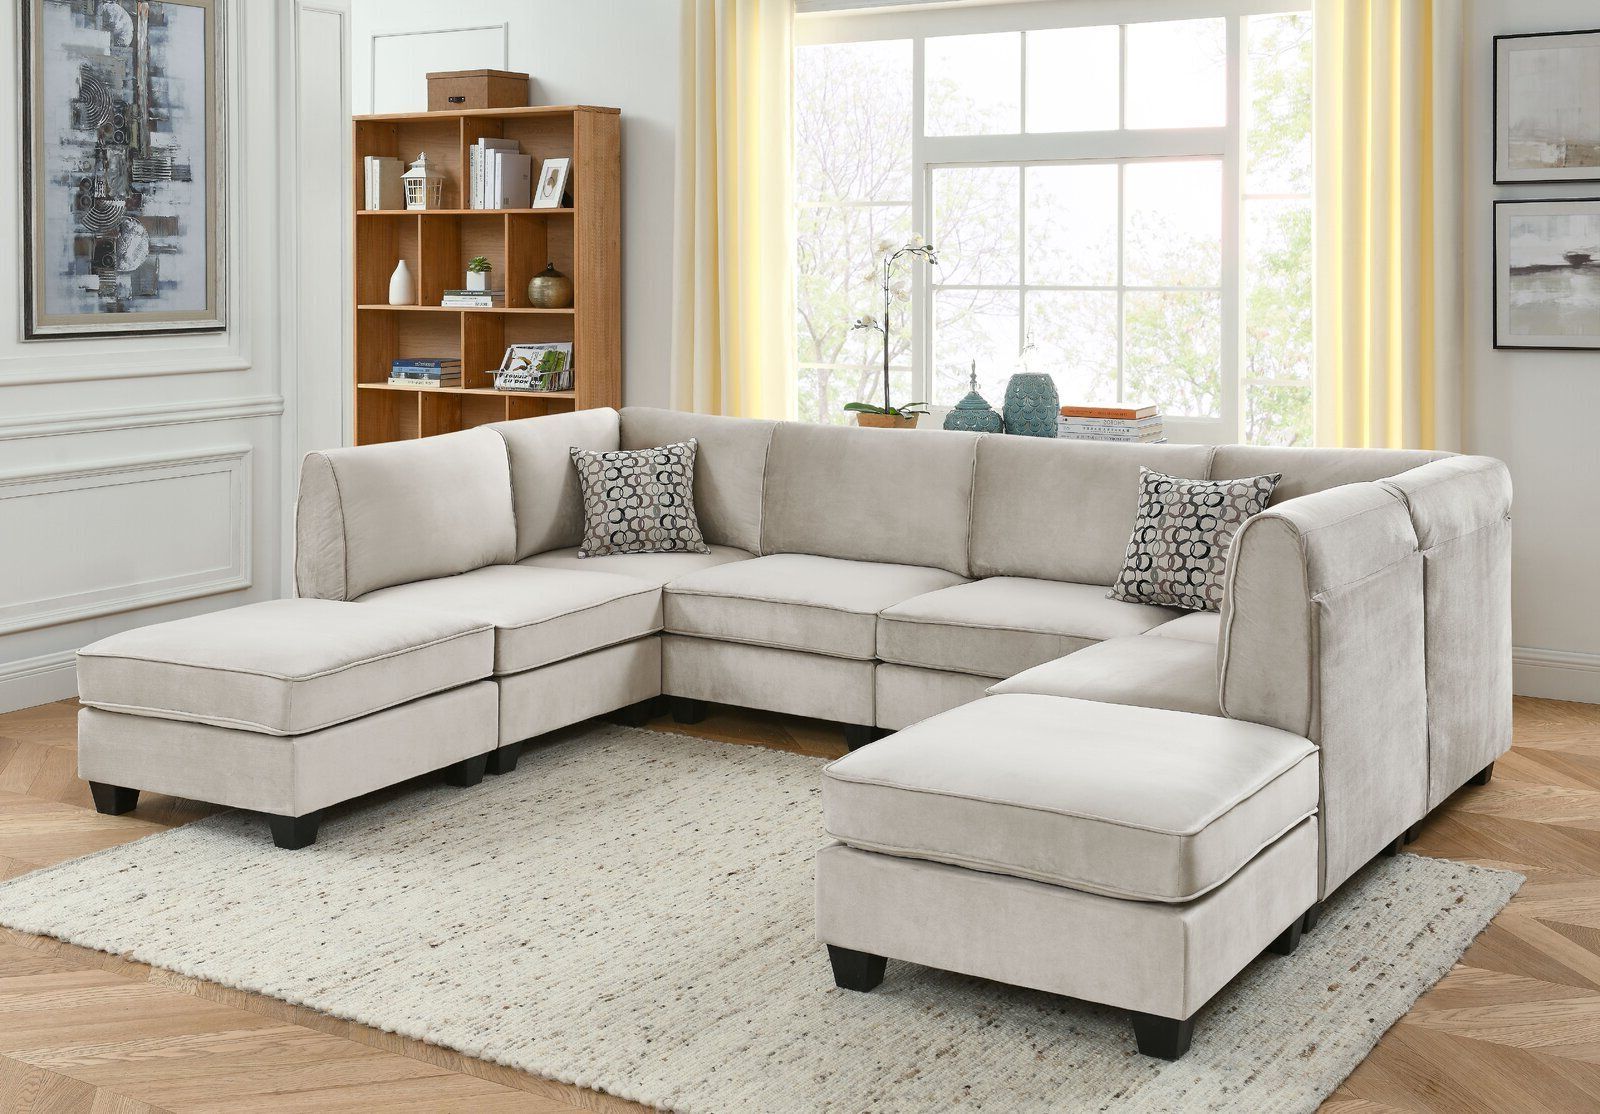 Sectional Sofa With Ottoman – Ideas On Foter Throughout Sectional Sofas With Ottomans And Tufted Back Cushion (Gallery 7 of 20)